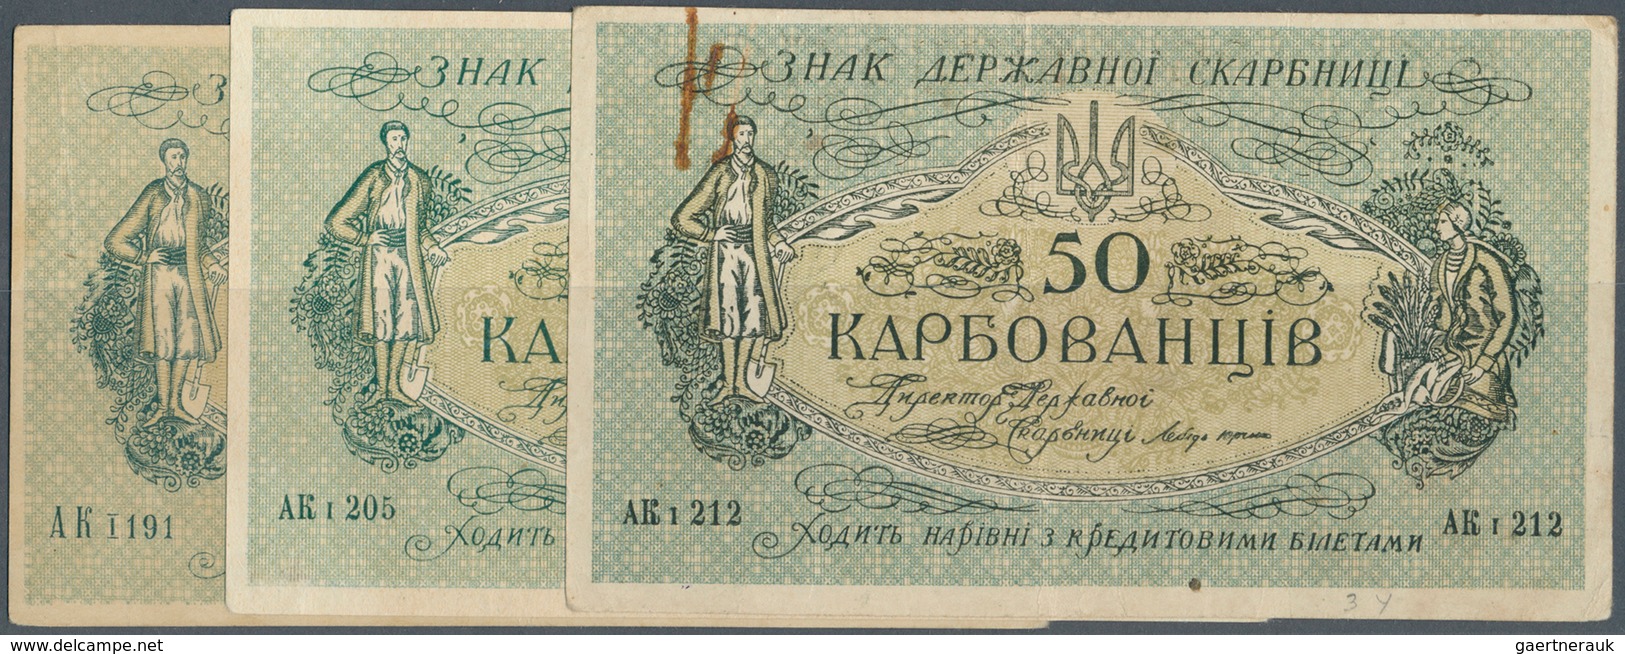 02567 Ukraina / Ukraine: Large Set With 26 Banknotes 50 Karbovantsiv ND(1918), P.5a All With Block Letters - Ucrania